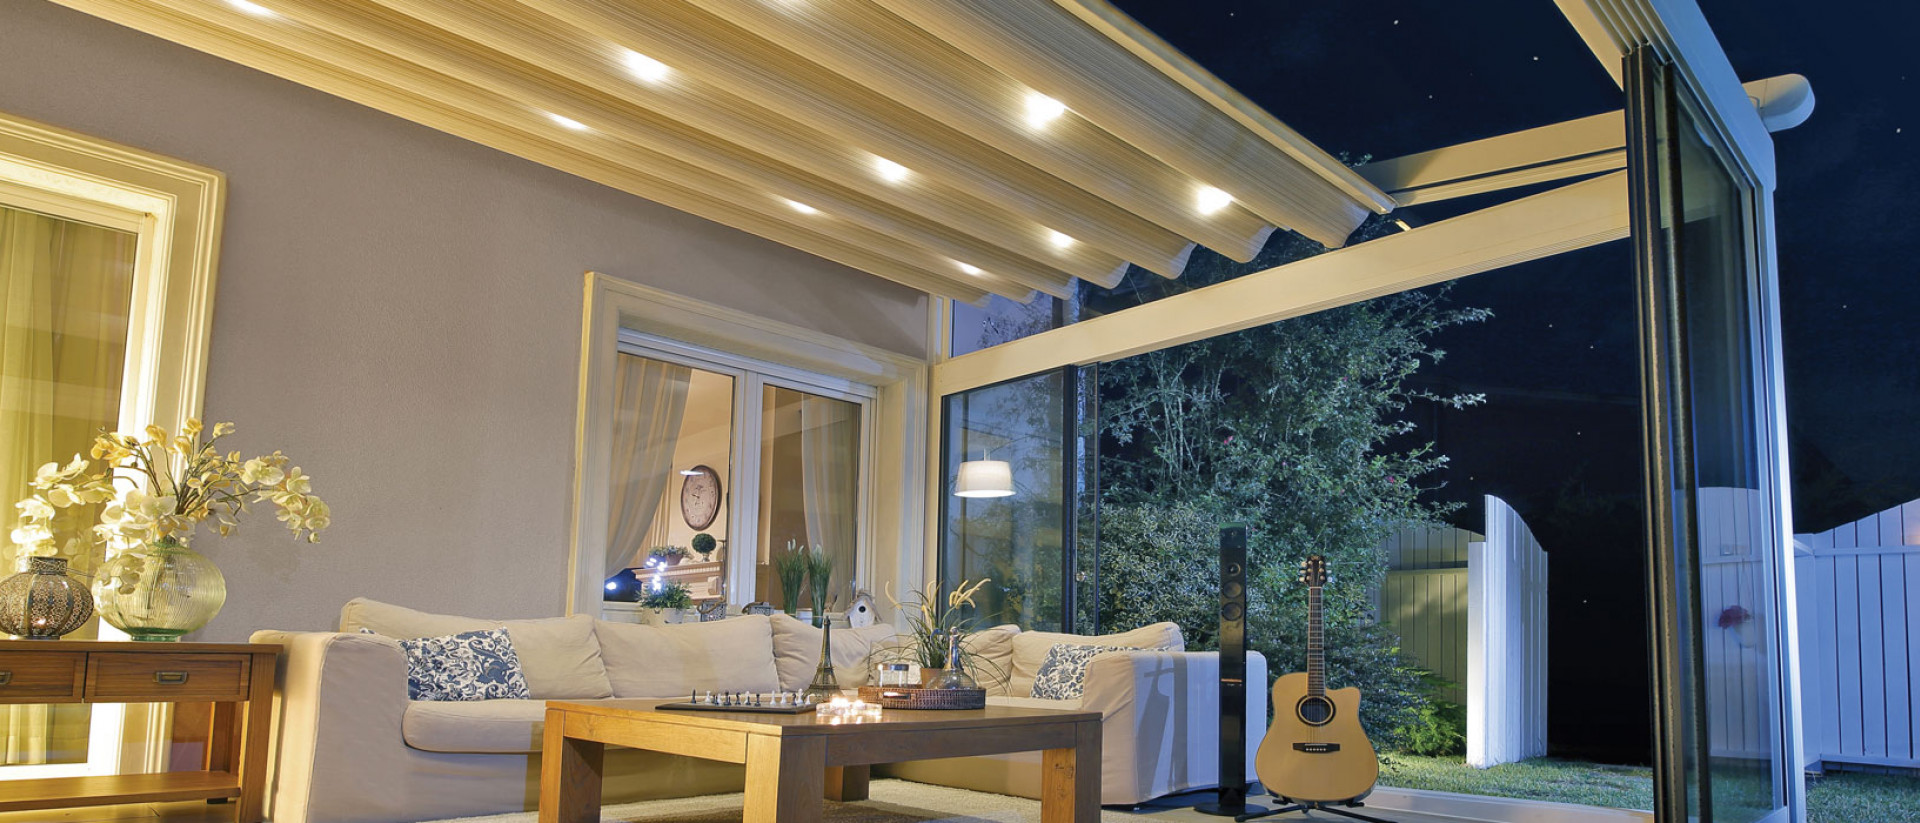 residential pergolas for automatic weather protection